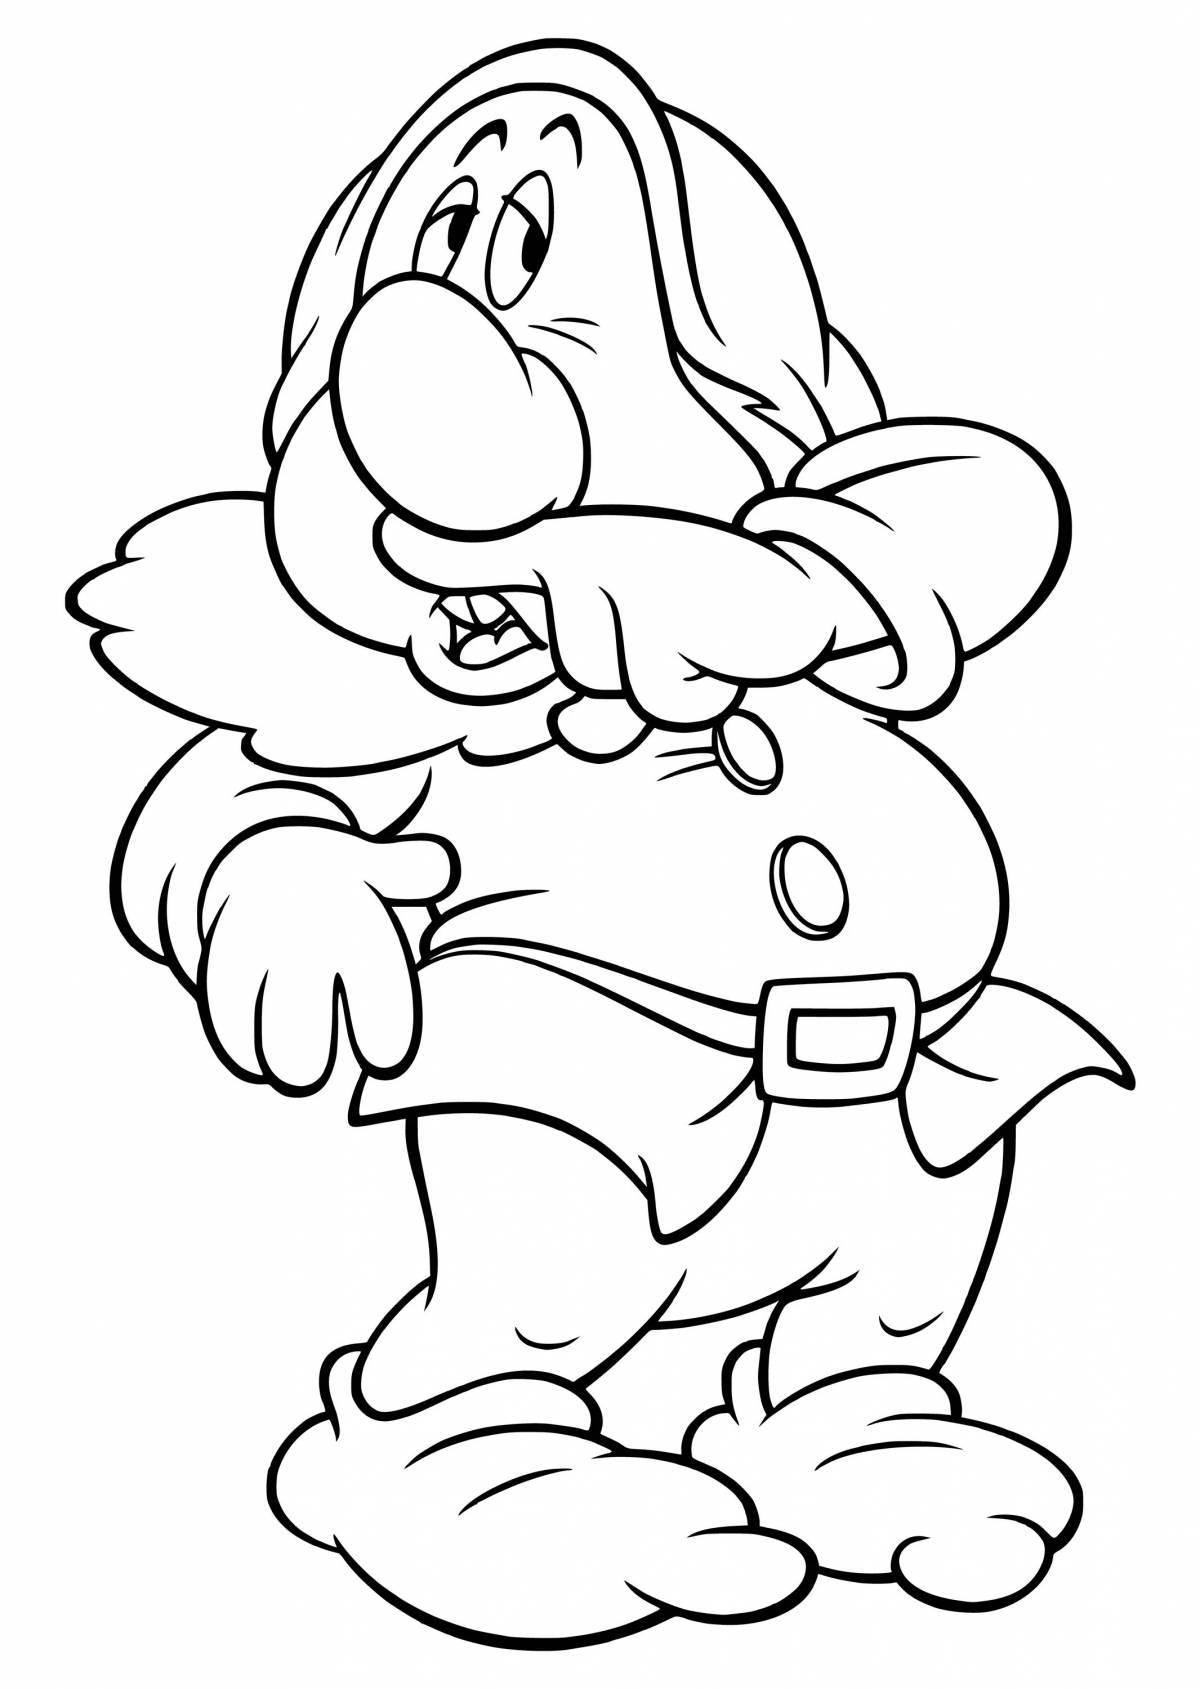 Colorful 7 dwarf coloring page